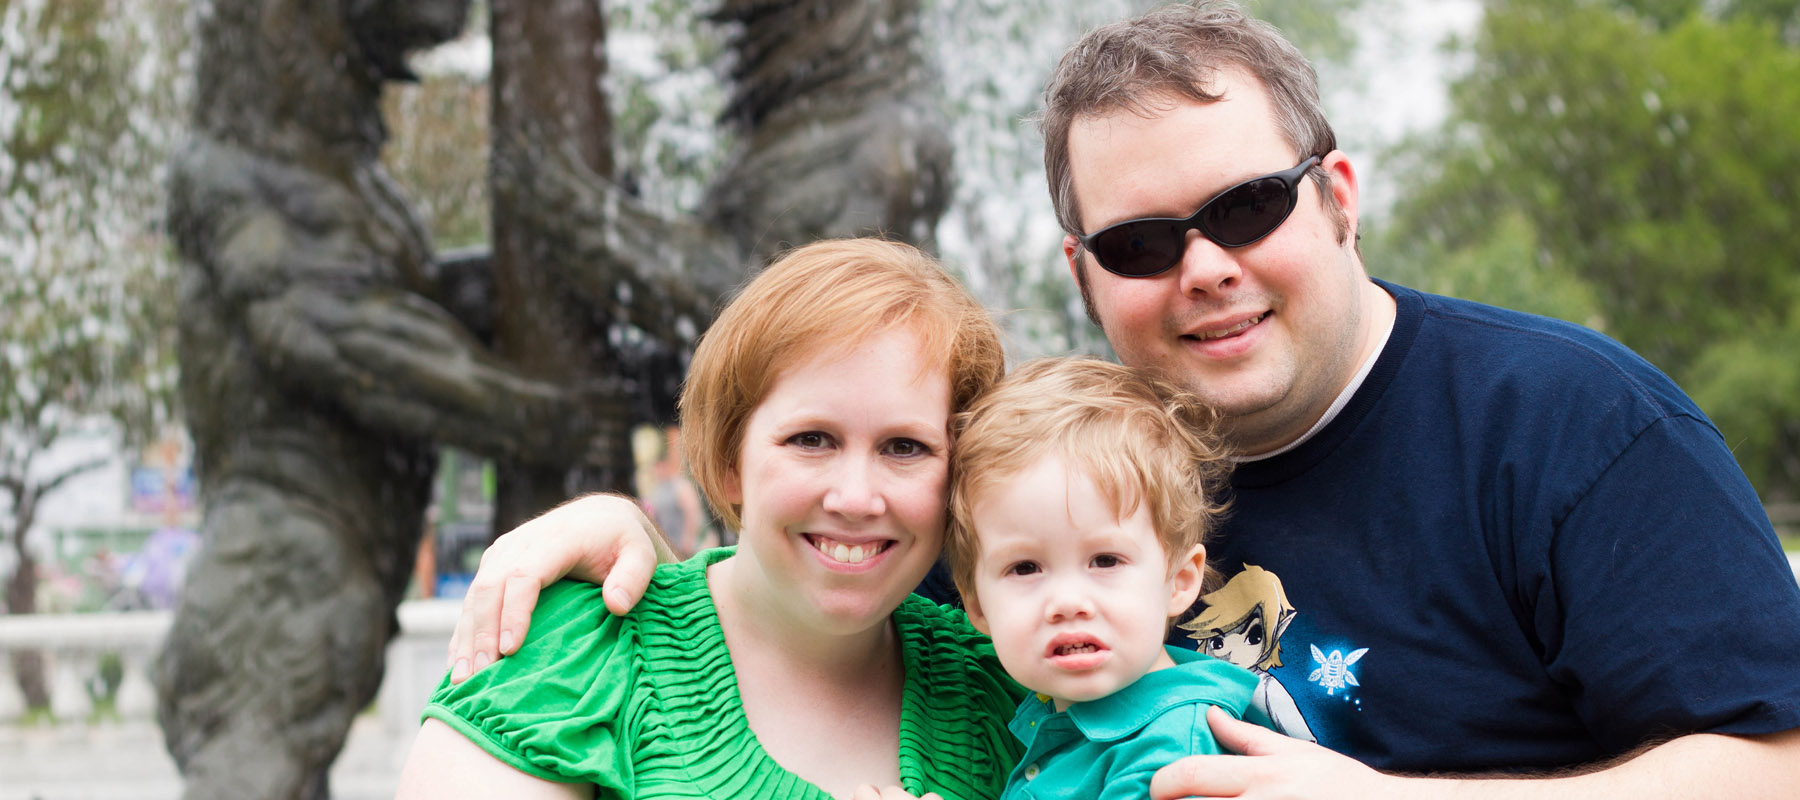 Kristen Grainer and family at the Detroit Zoo in 2013